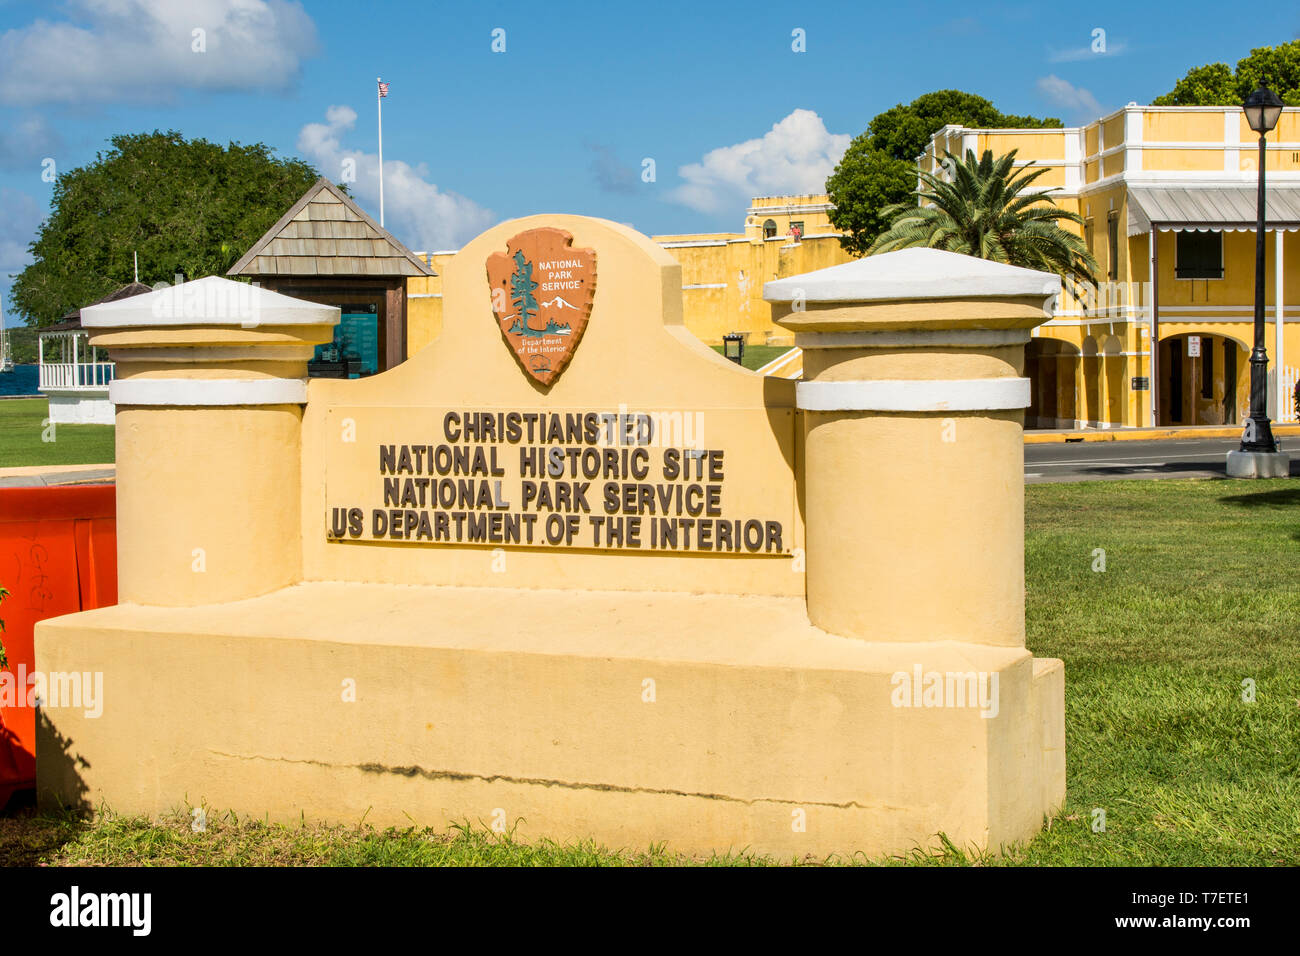 Christiansted National Historic Site, Christiansted, St. Croix, Isole Vergini americane. Foto Stock